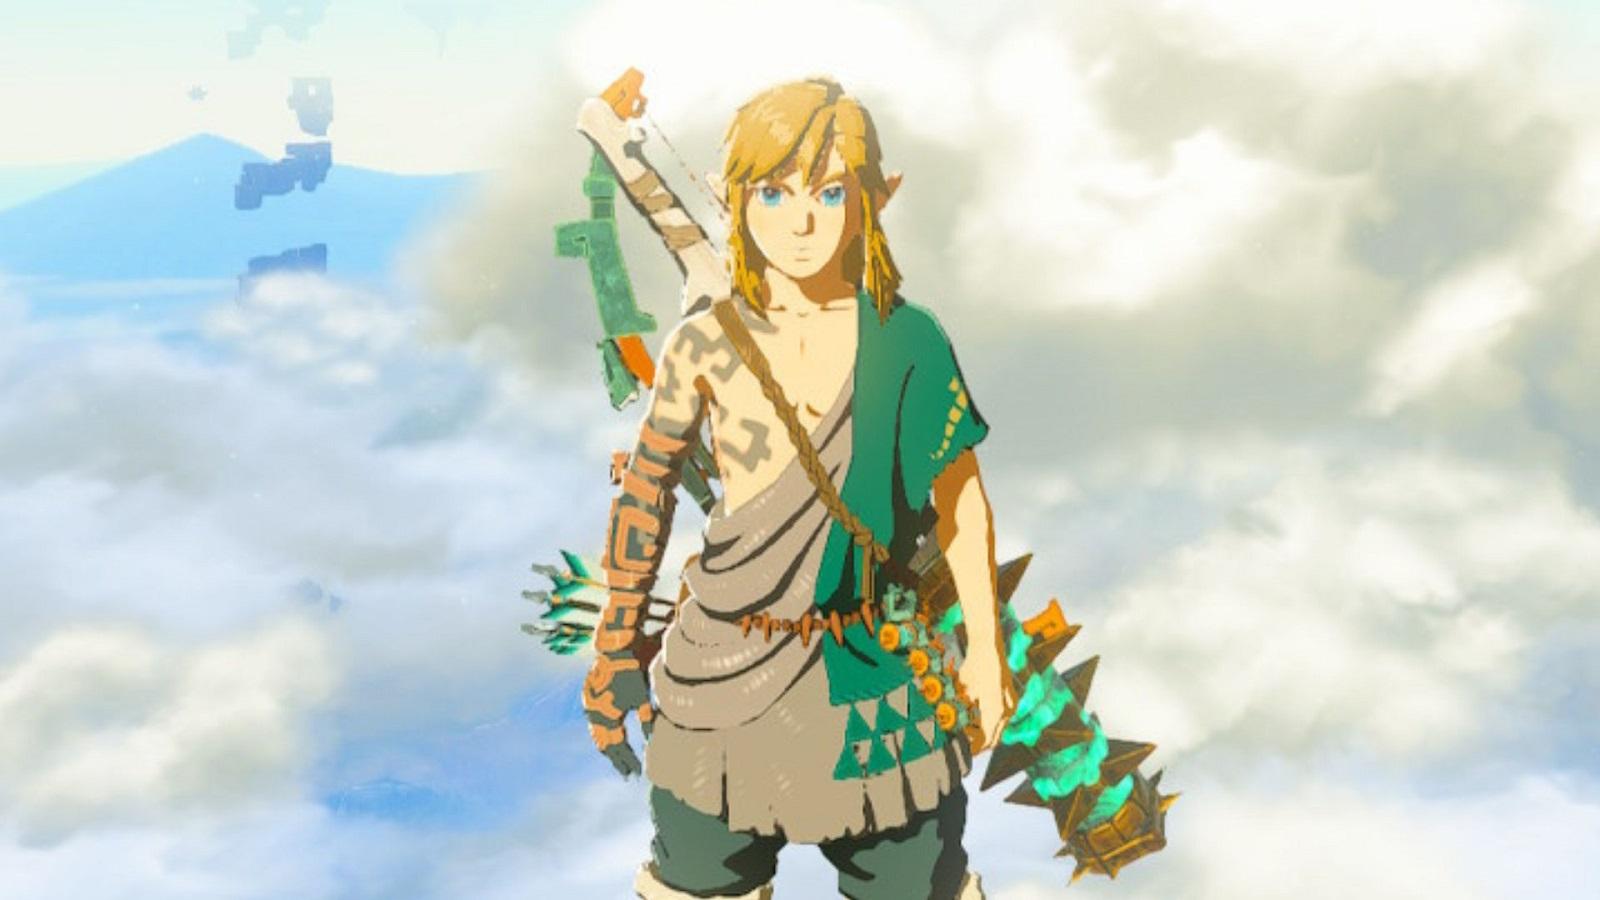 Link standing in the clouds